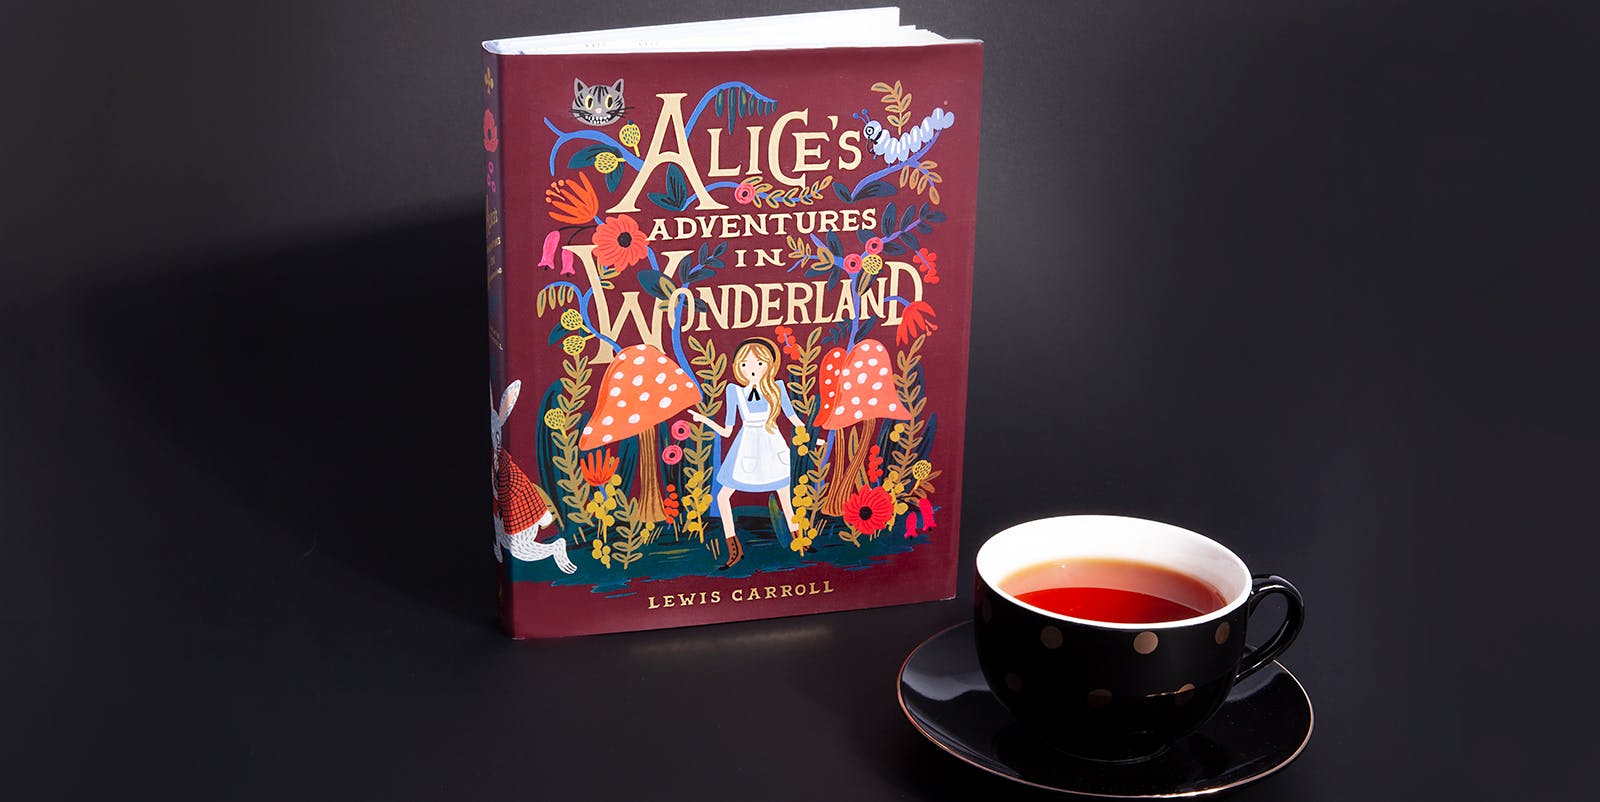 How well do you know Lewis Carroll?